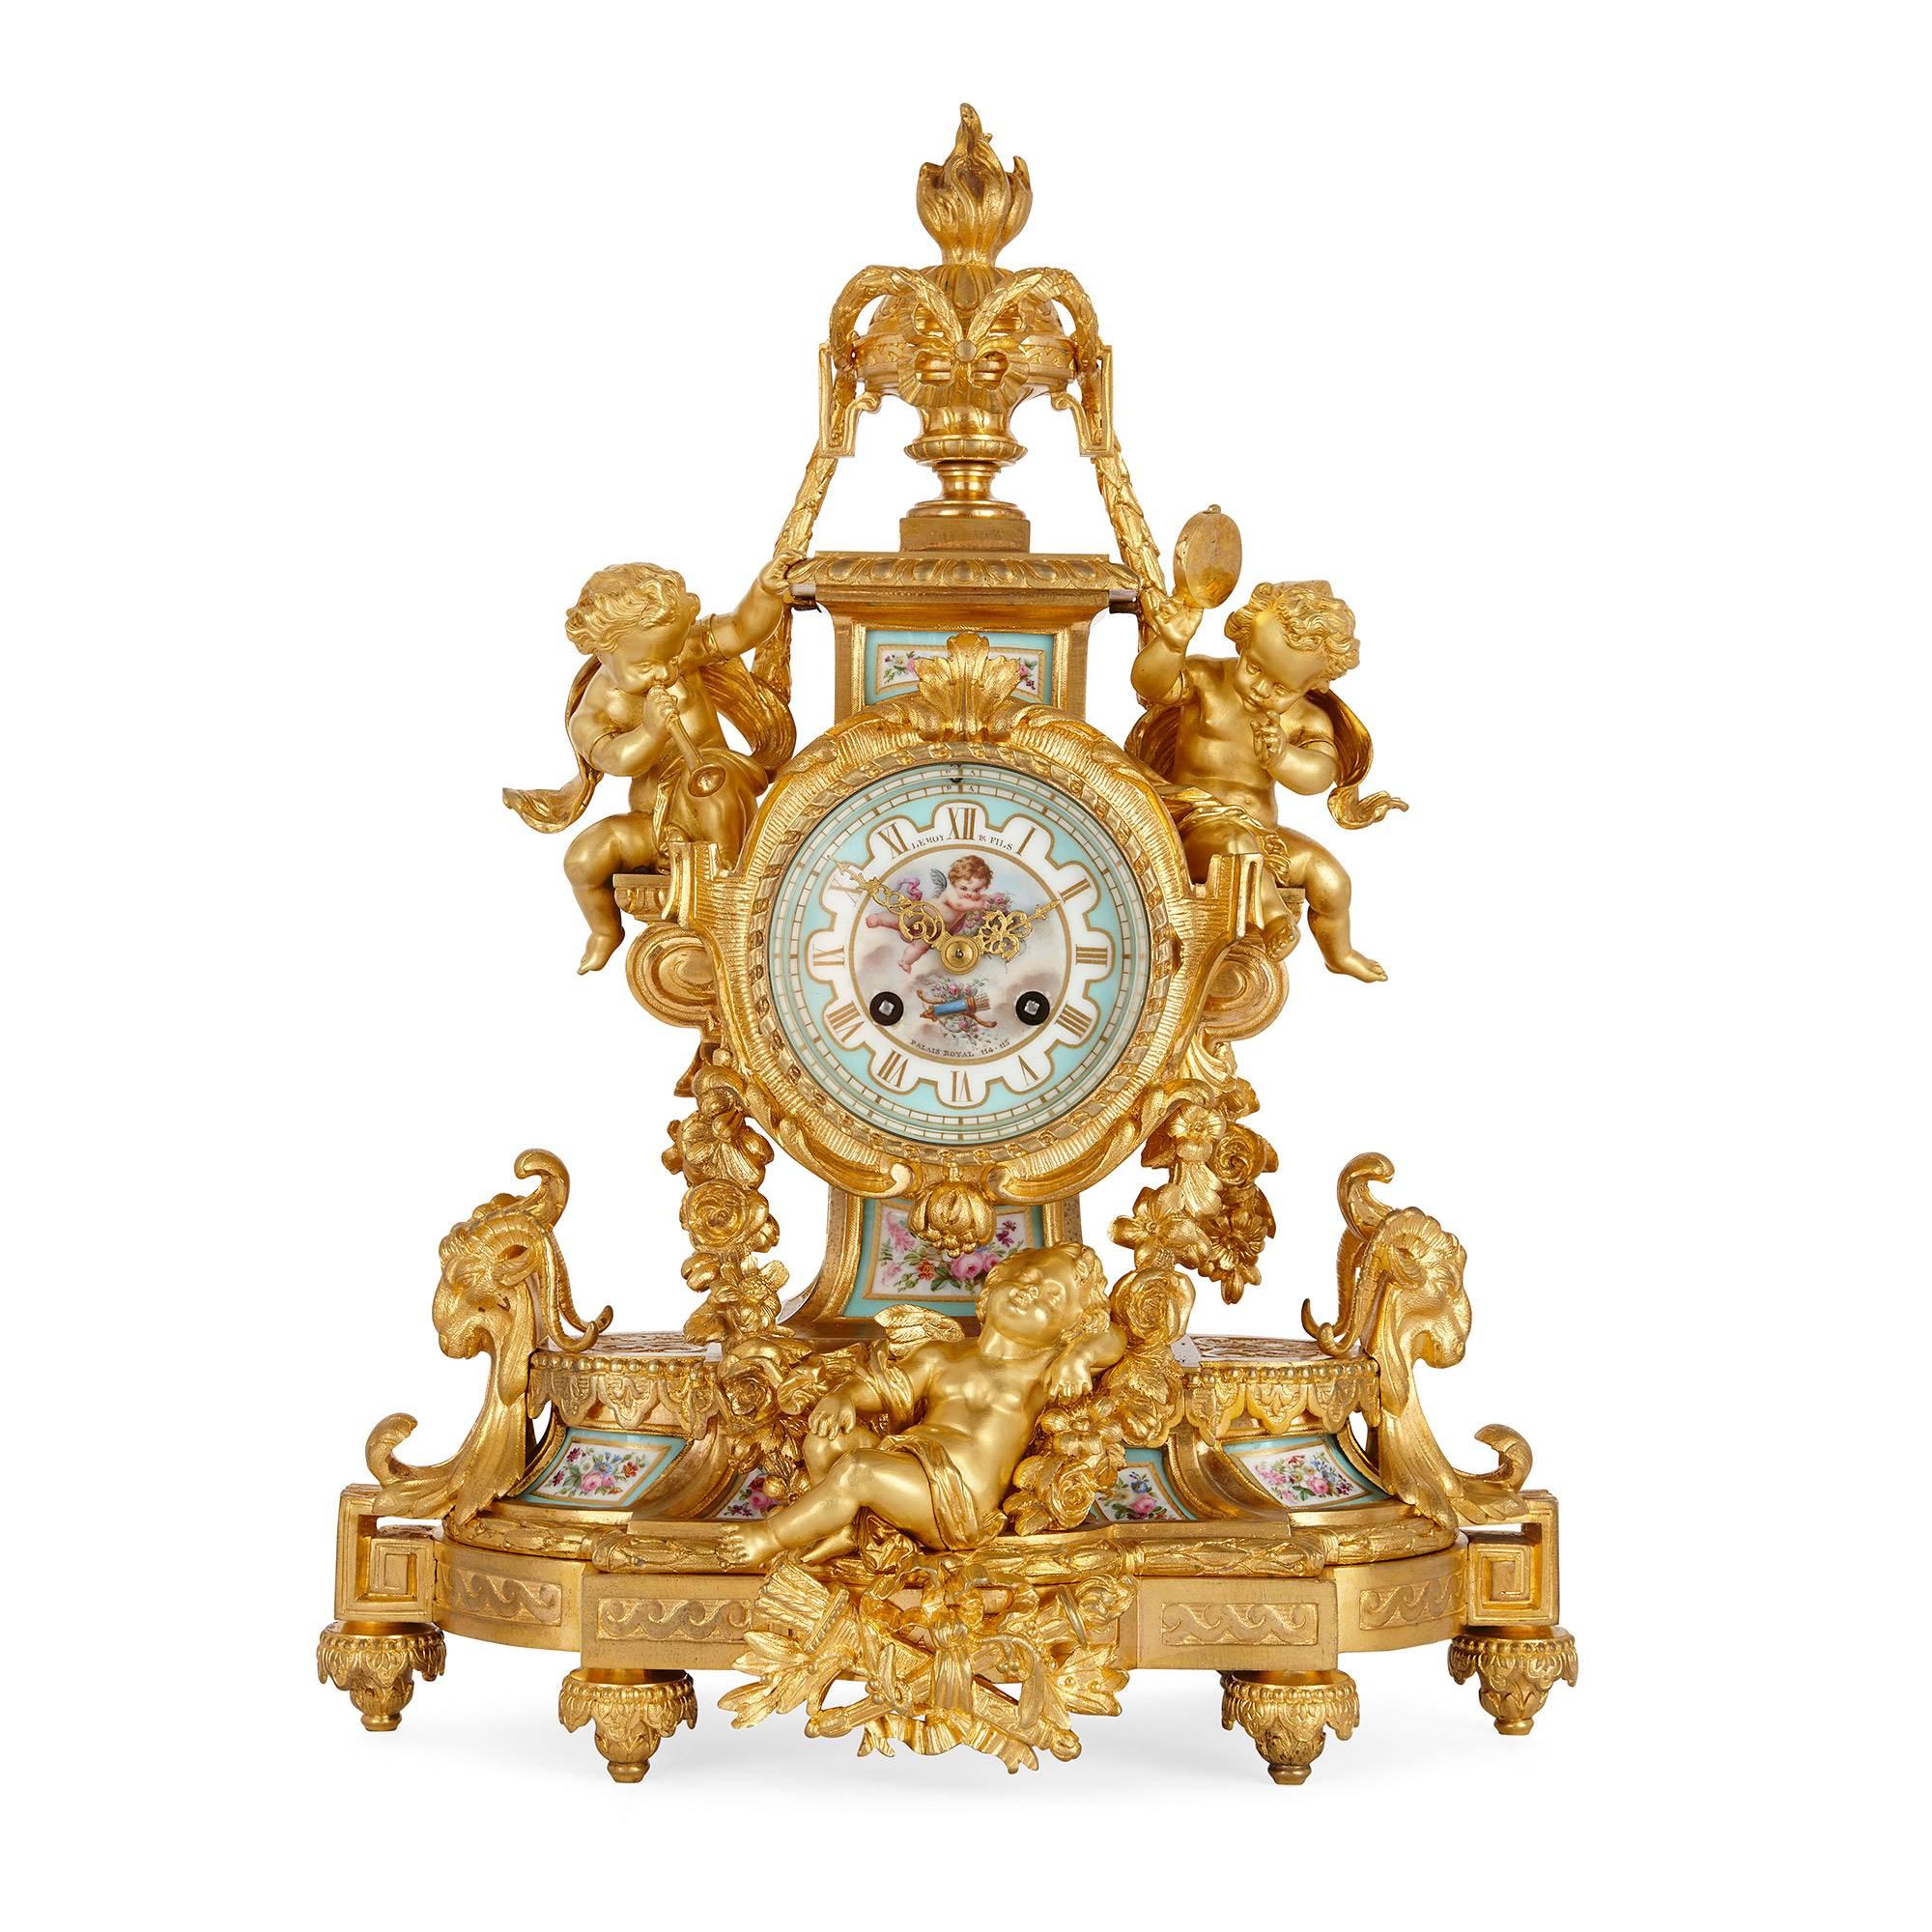 This exquisite antique French clock set is comprised of a central clock and a pair of flanking candelabra. The clock and accompanying candelabra are similarly decorated, with ormolu embellishments in the neoclassical style. The central clock itself